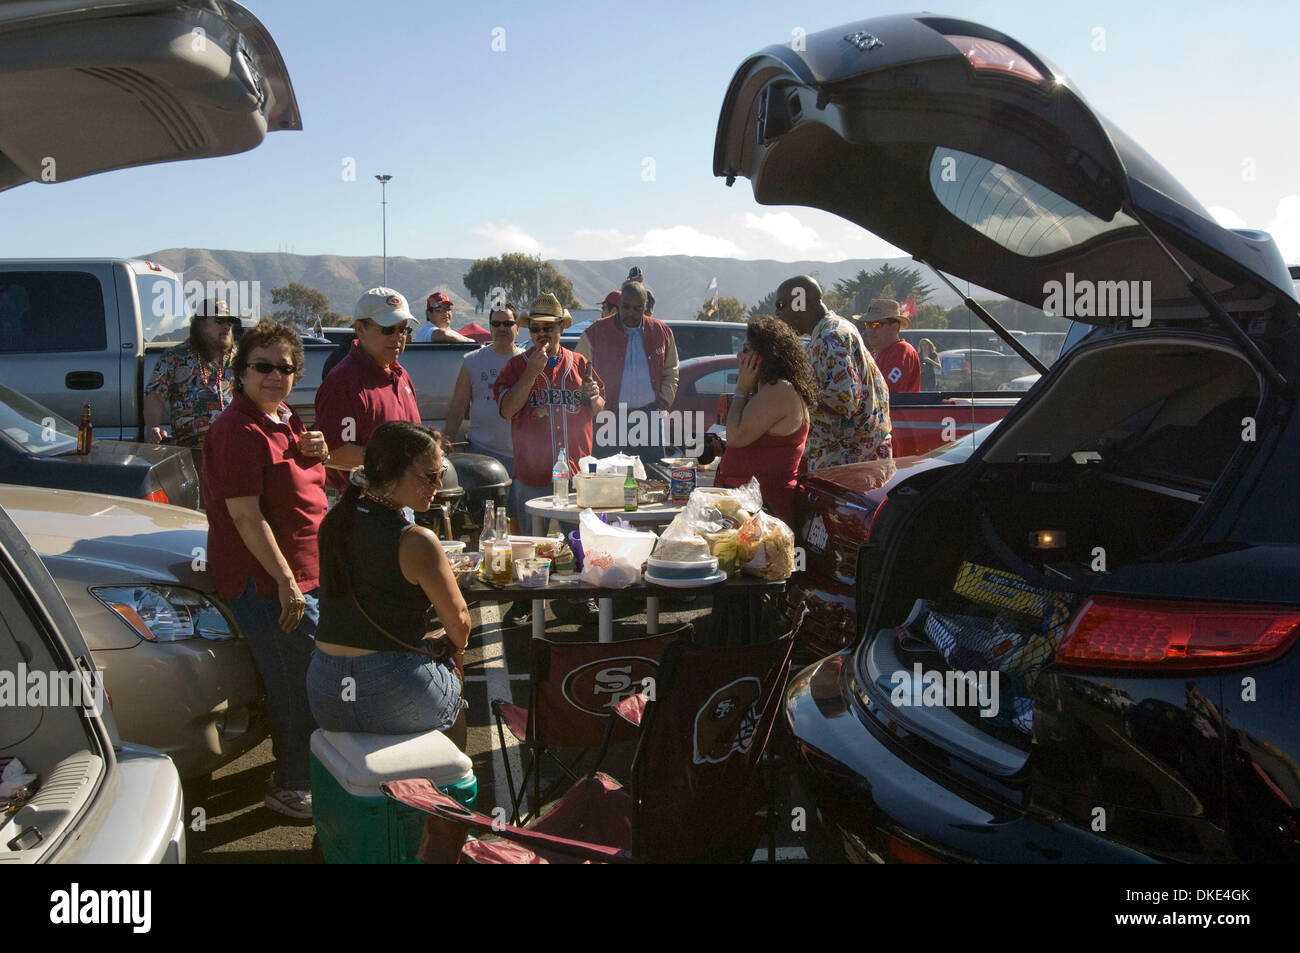 Aug.18, 2007 - San Francisco, California, U.S. - San Francisco 49ers vs Oakland Raiders at Bill Walsh field. Tailgate activity in parking lot.  49er bay area family type have pleasant meal for the game. (Credit: © Al Golub/ZUMApress.com) Stock Photo